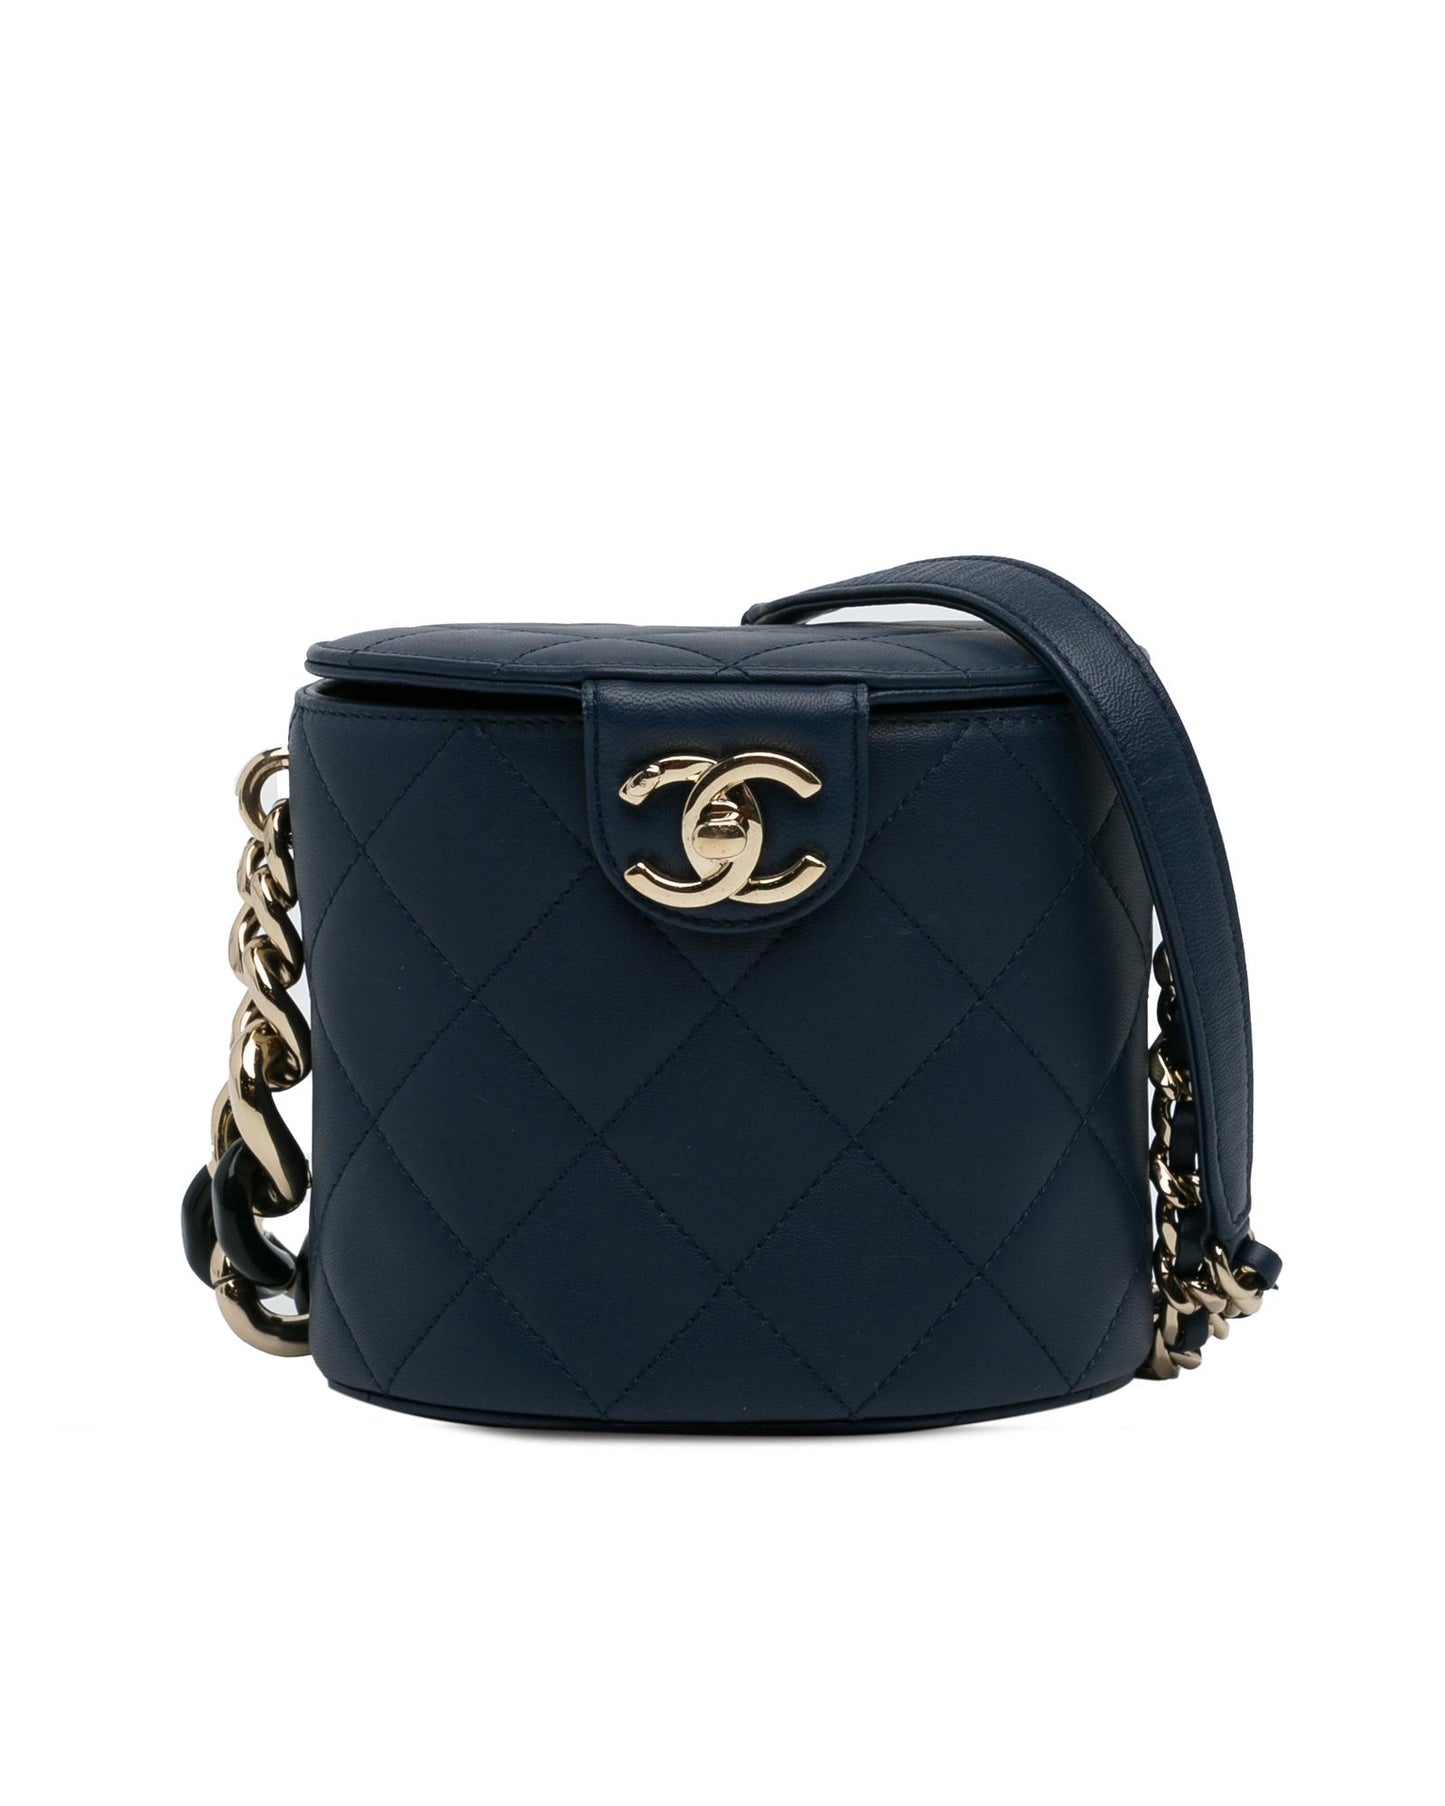 Chanel Women's Quilted Leather Chain Strap Vanity Bag in Blue